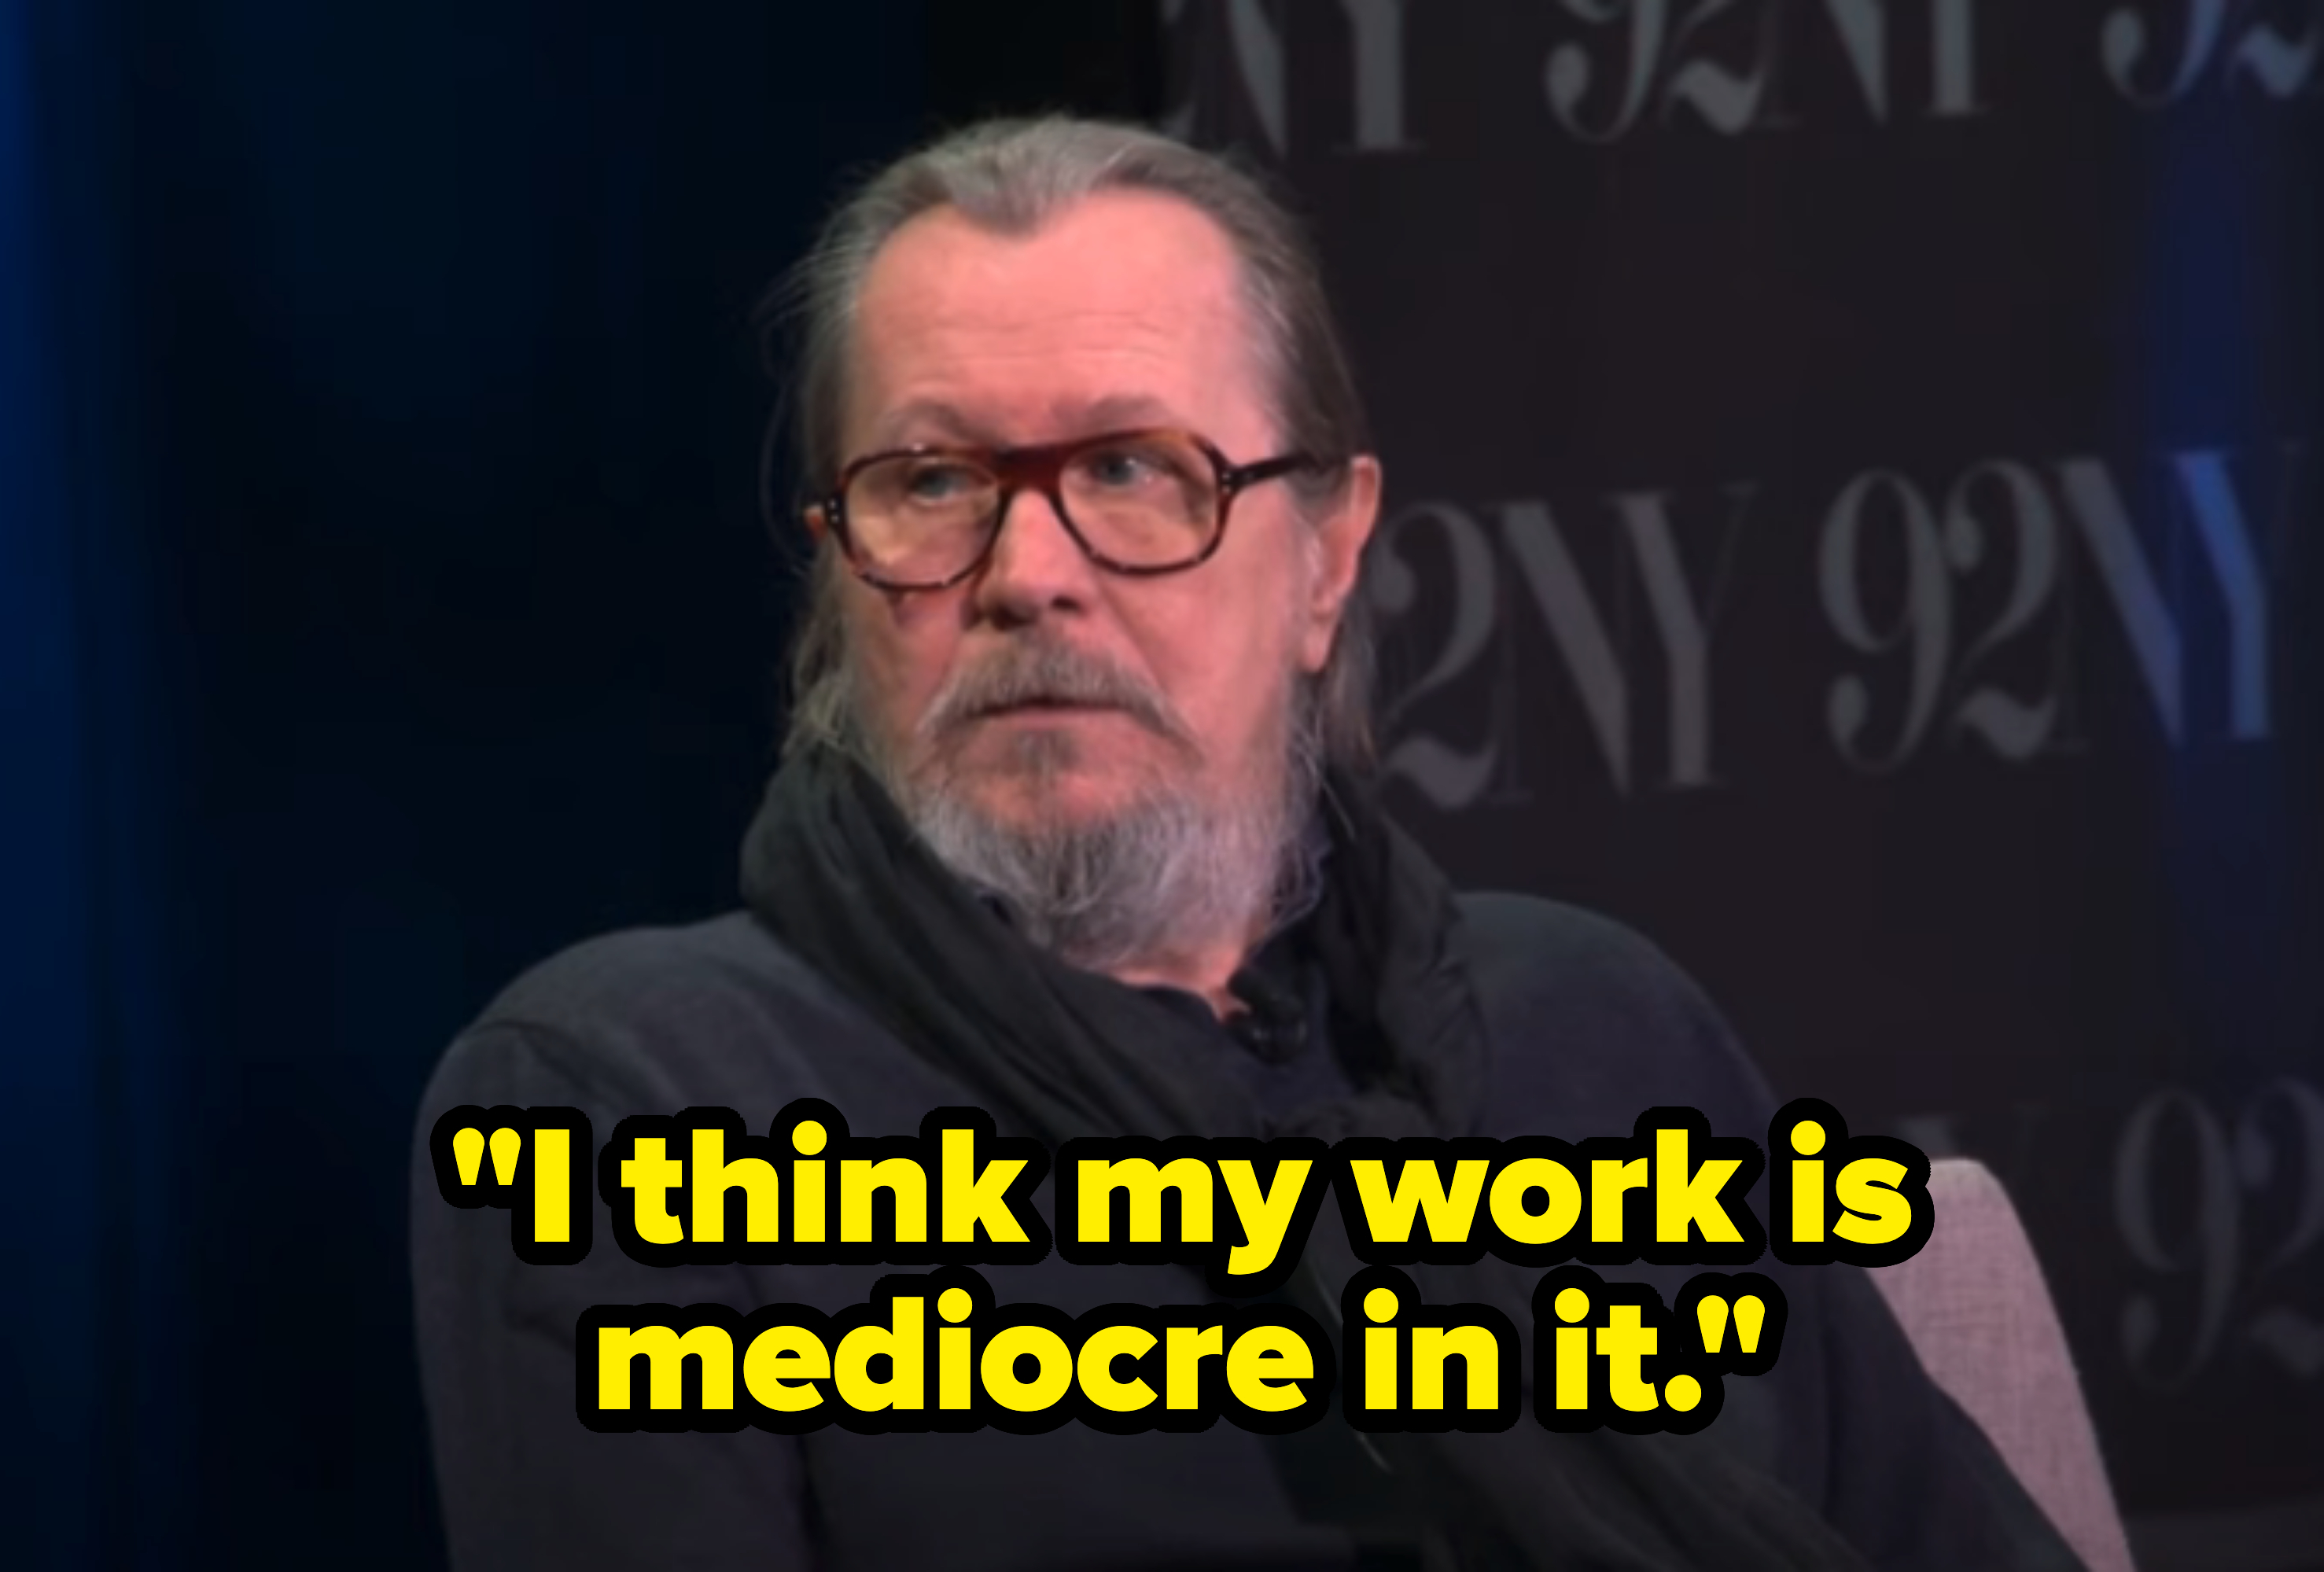 &quot;I think my work is mediocre in it&quot;